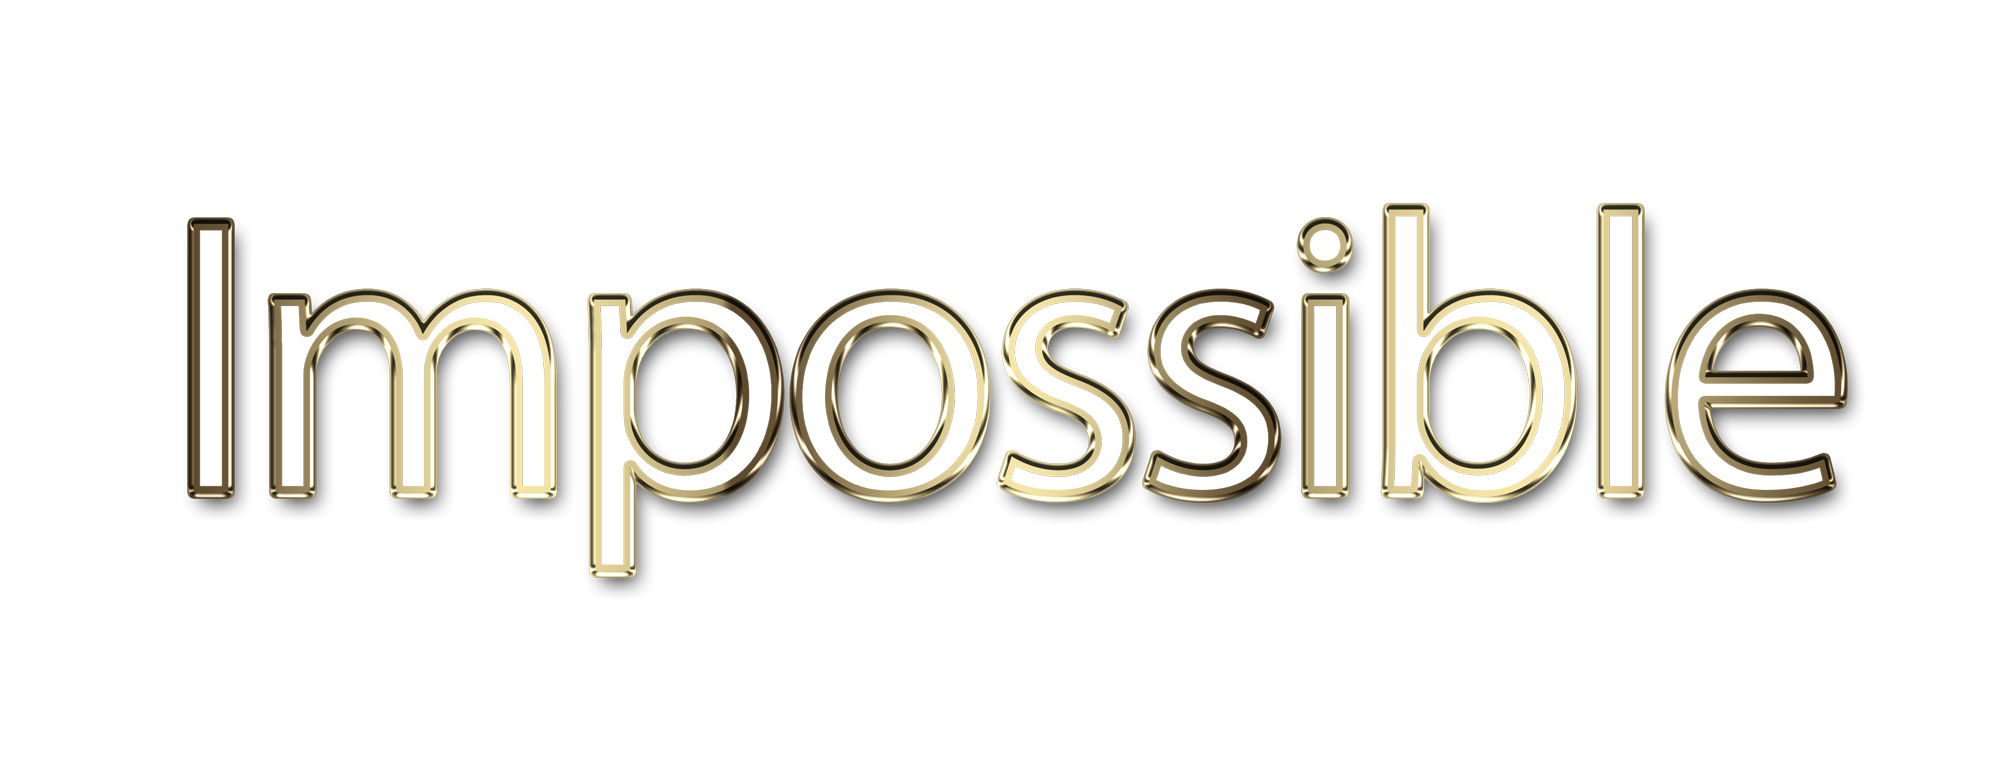 Impossible png, word Impossible png, Impossible word png, Impossible text png, Impossible letters png, Impossible word art typography PNG images, transparent png